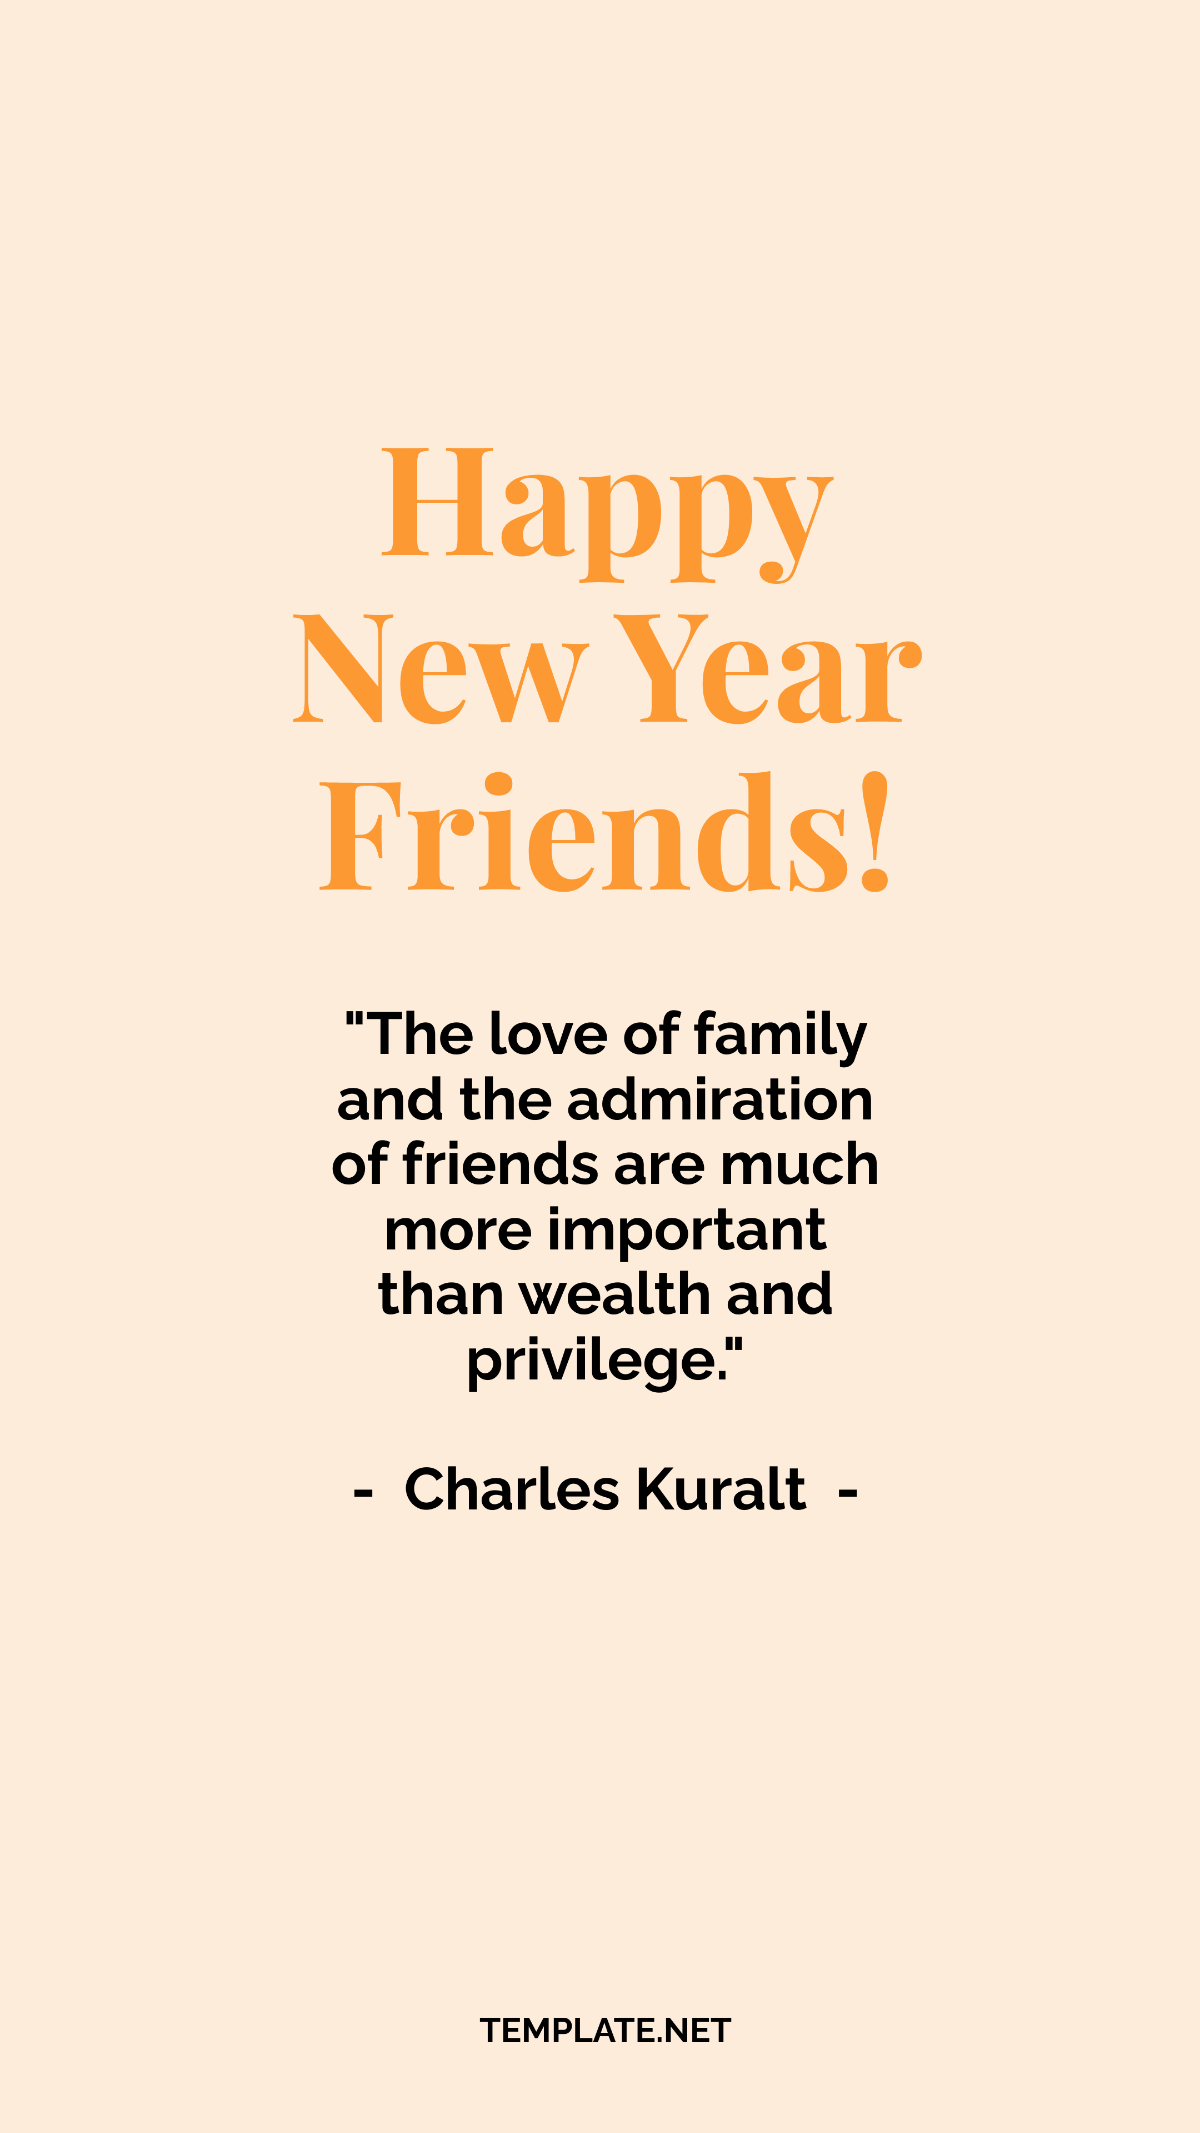 Free New Year Quote For Friends Template